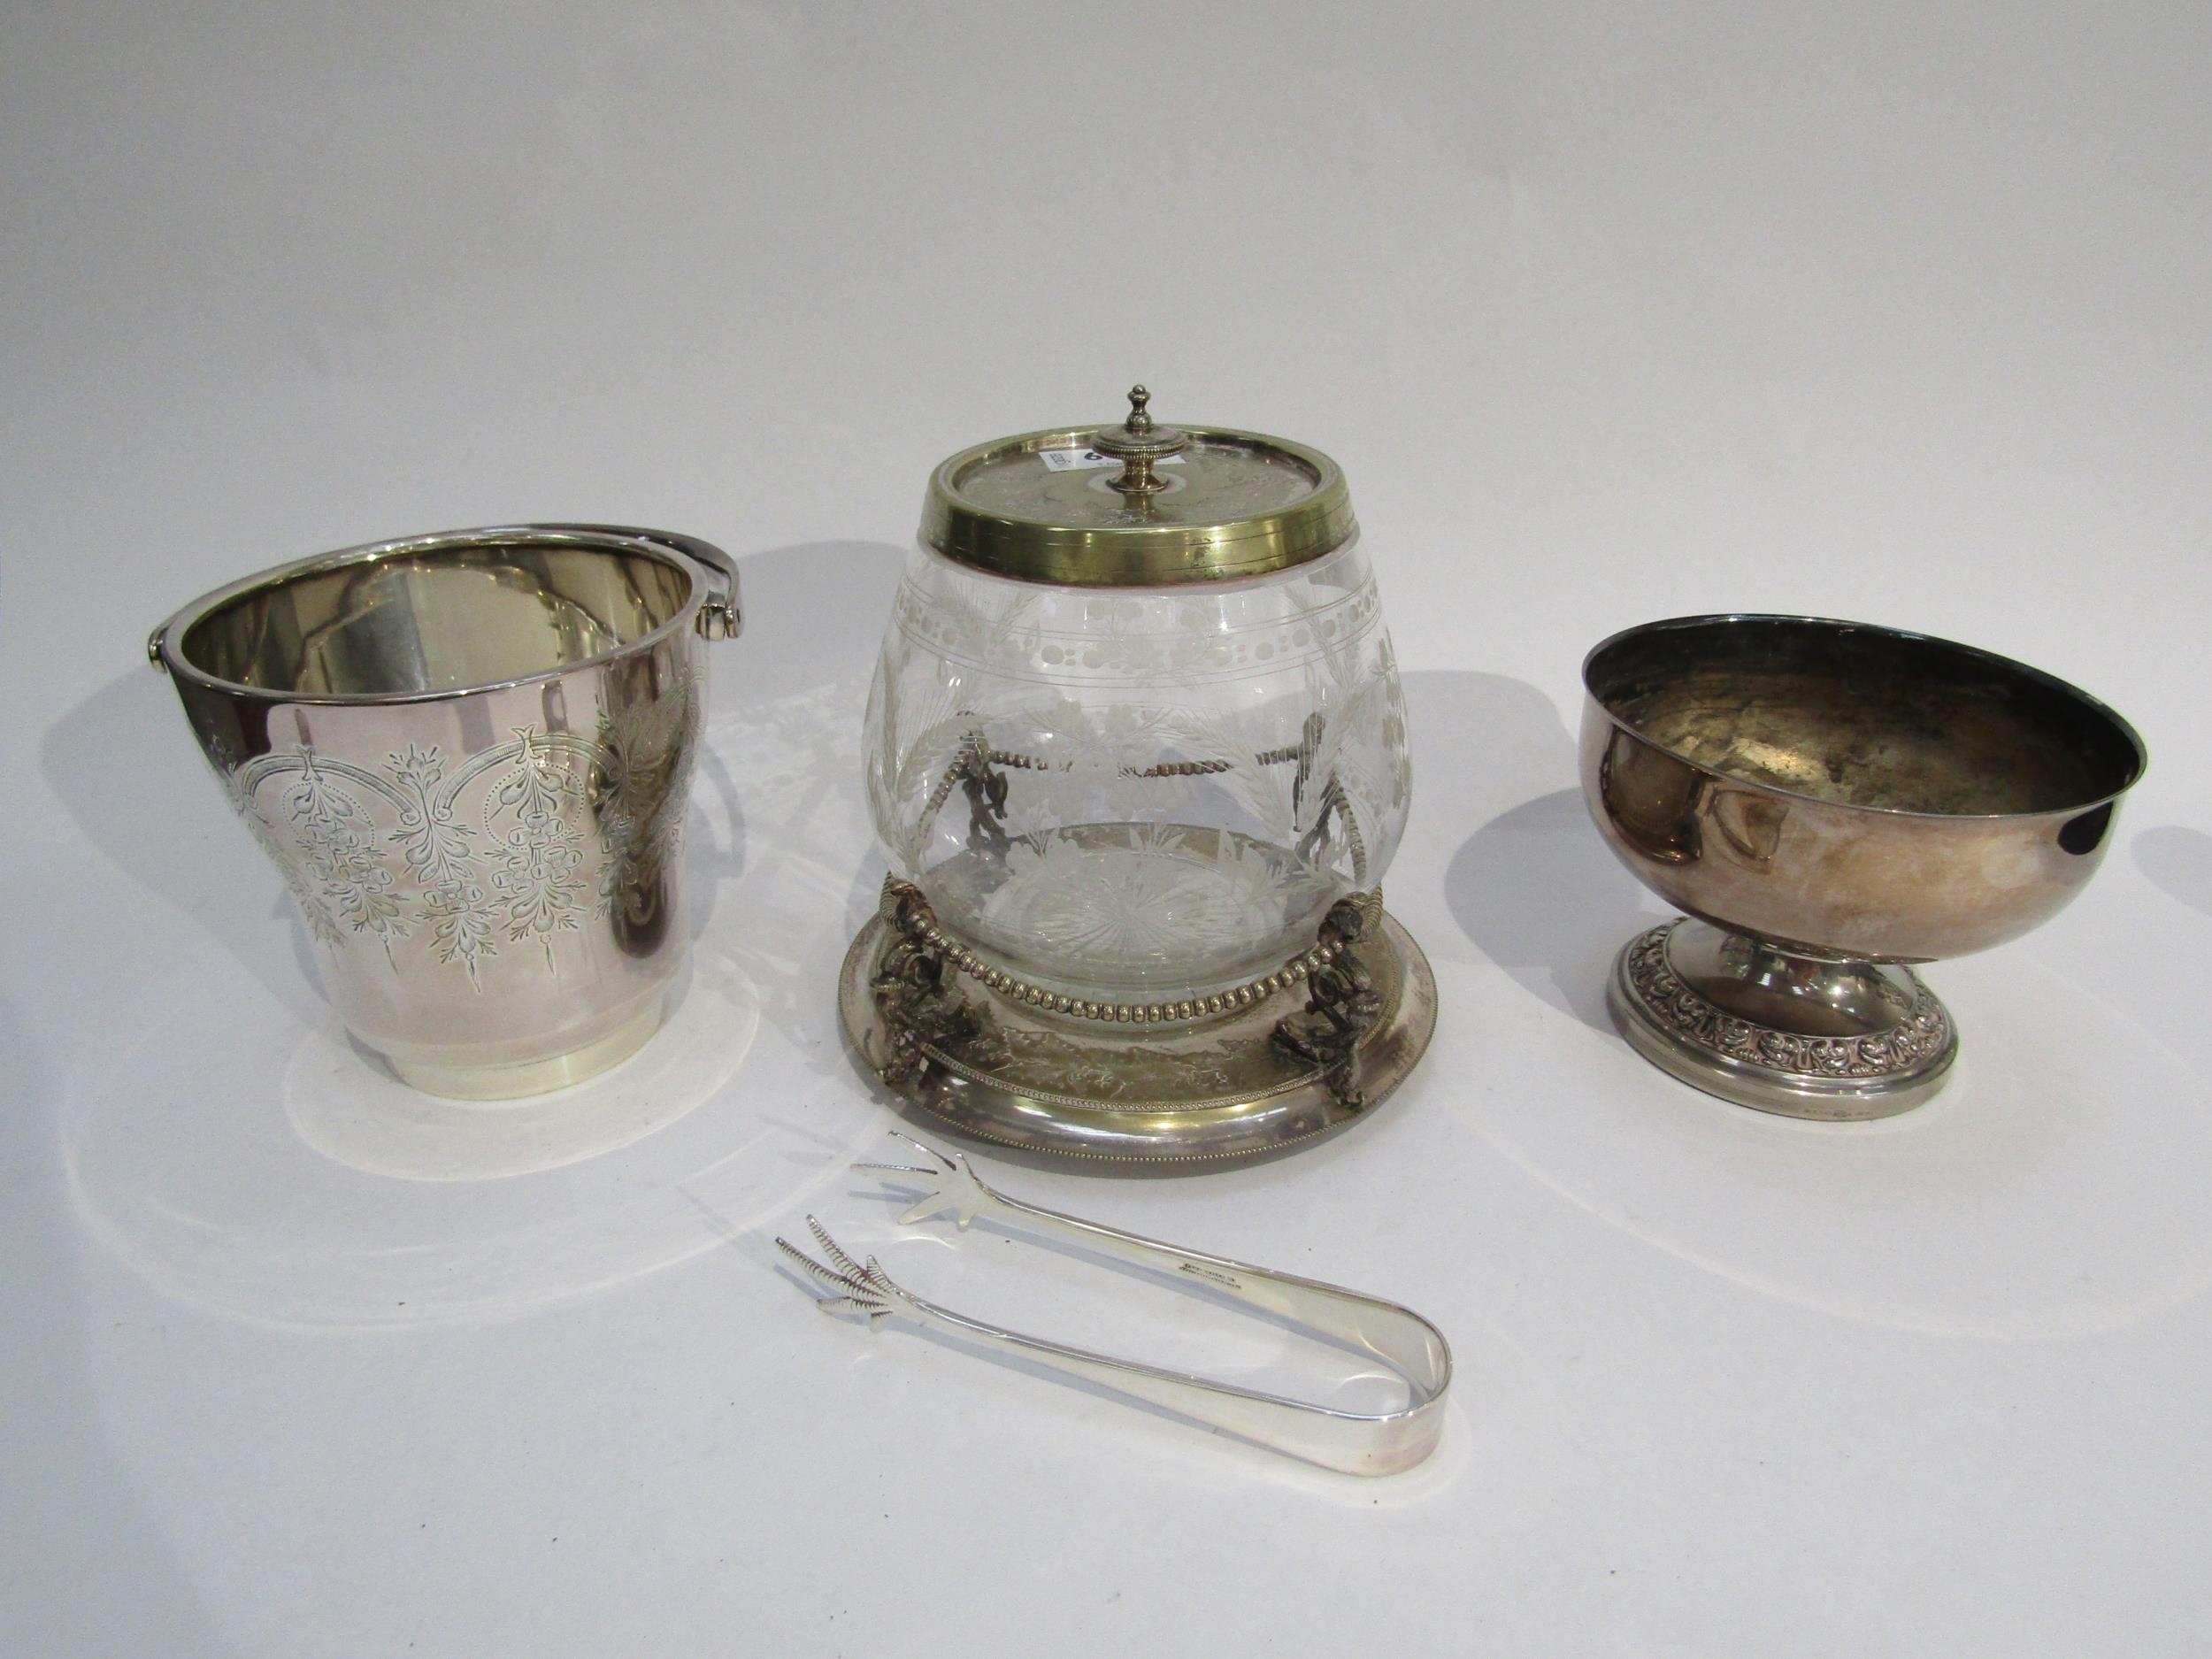 Silverplated ice bucket, biscuit barrel and pedestal bowl (3) - Image 2 of 2